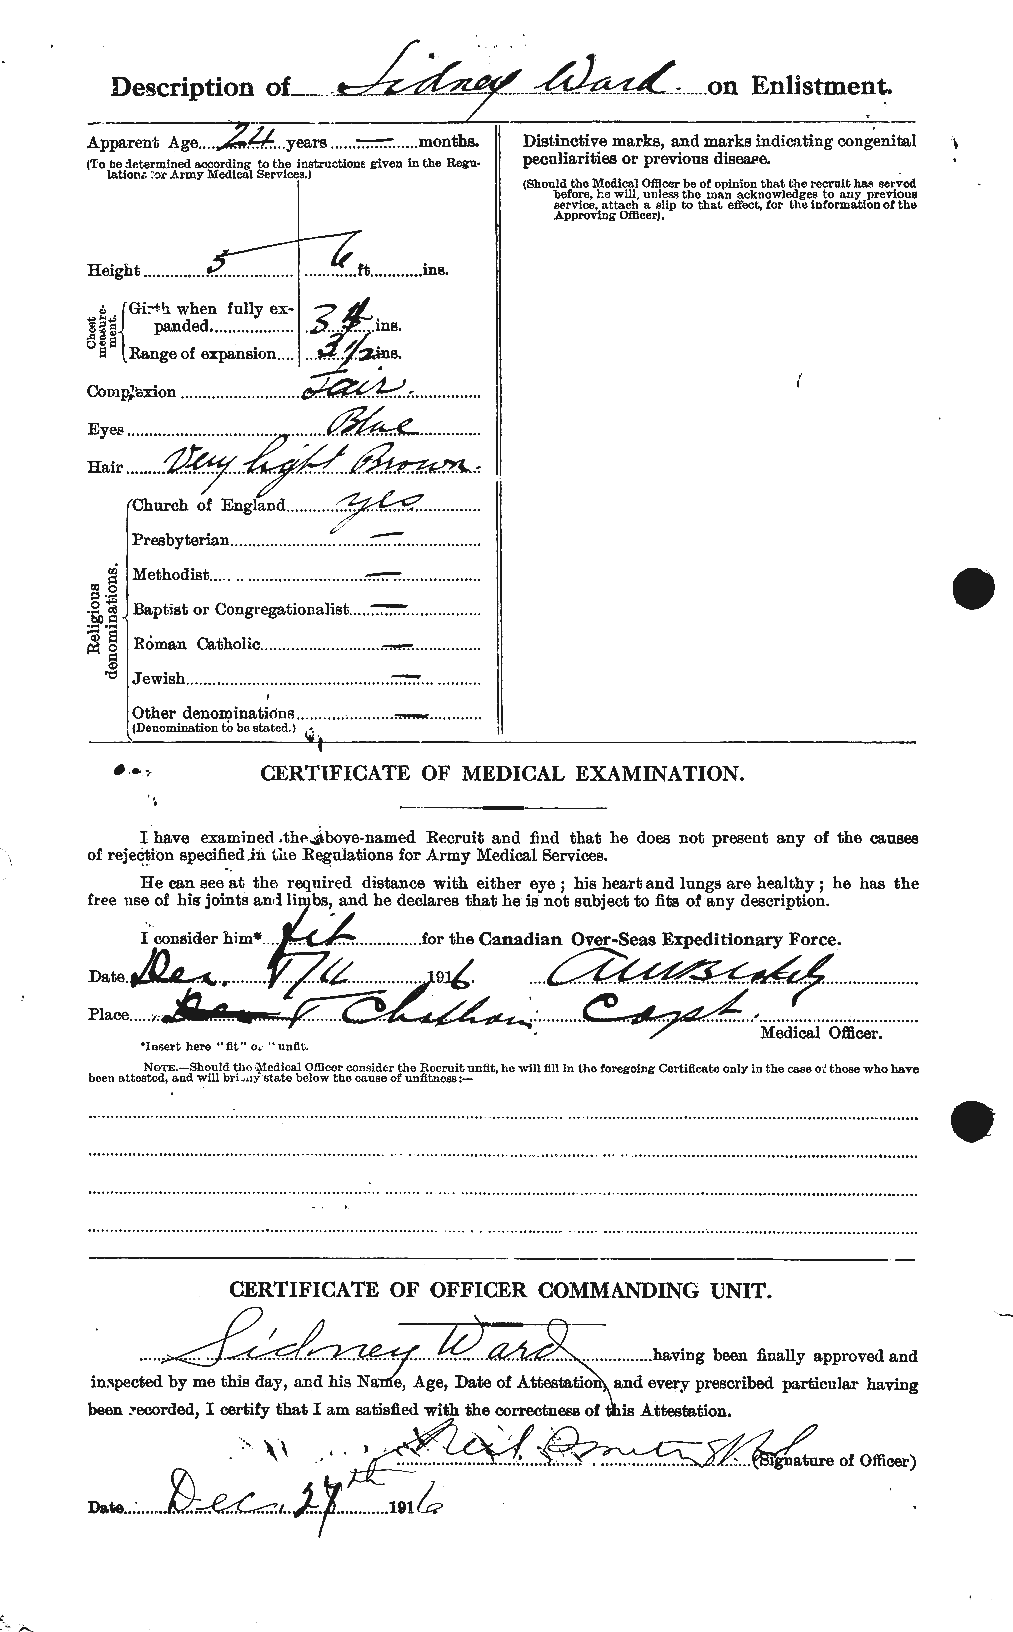 Personnel Records of the First World War - CEF 659688b